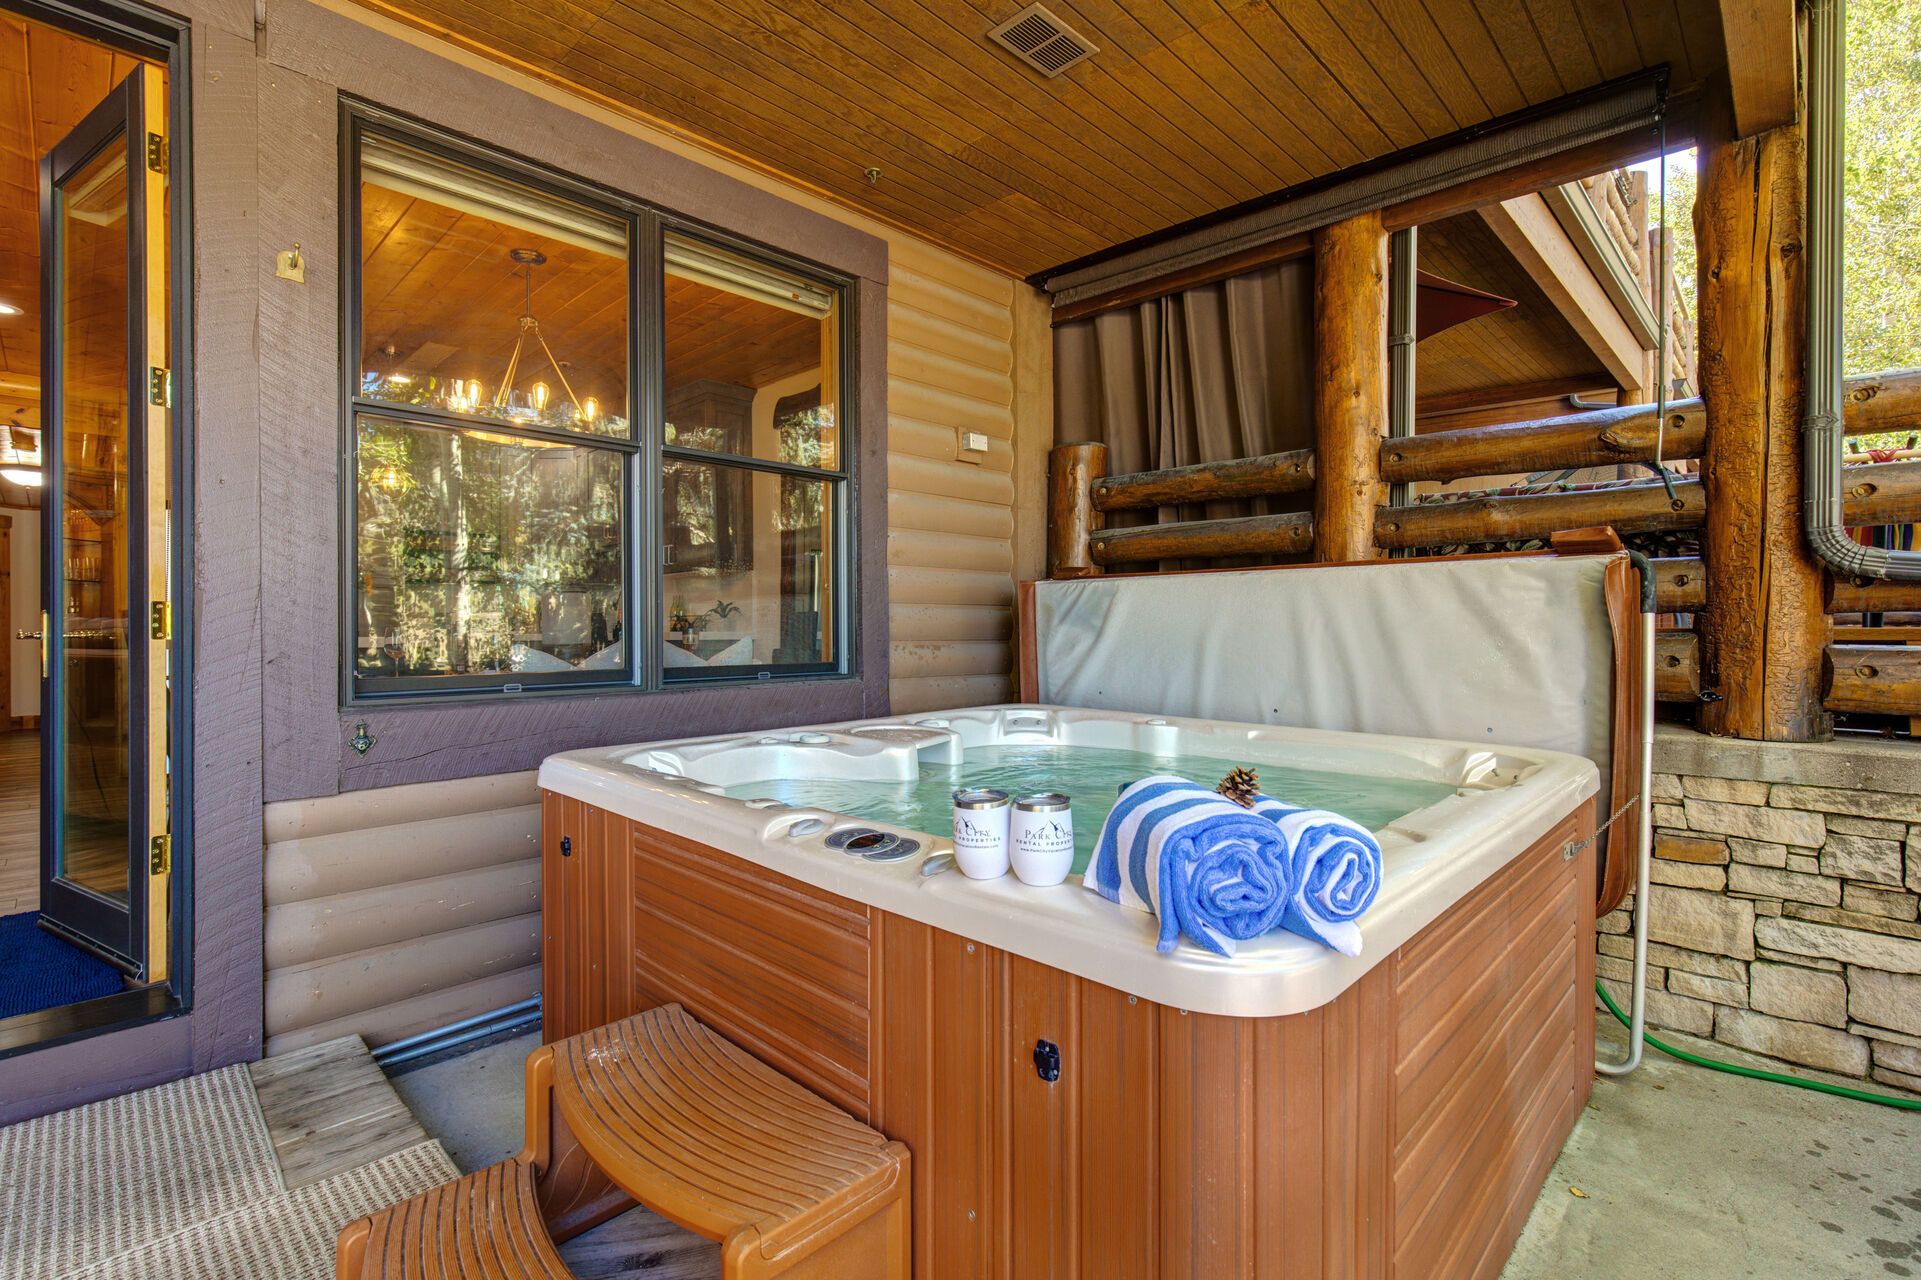 Large Deck with a Private Hot Tub